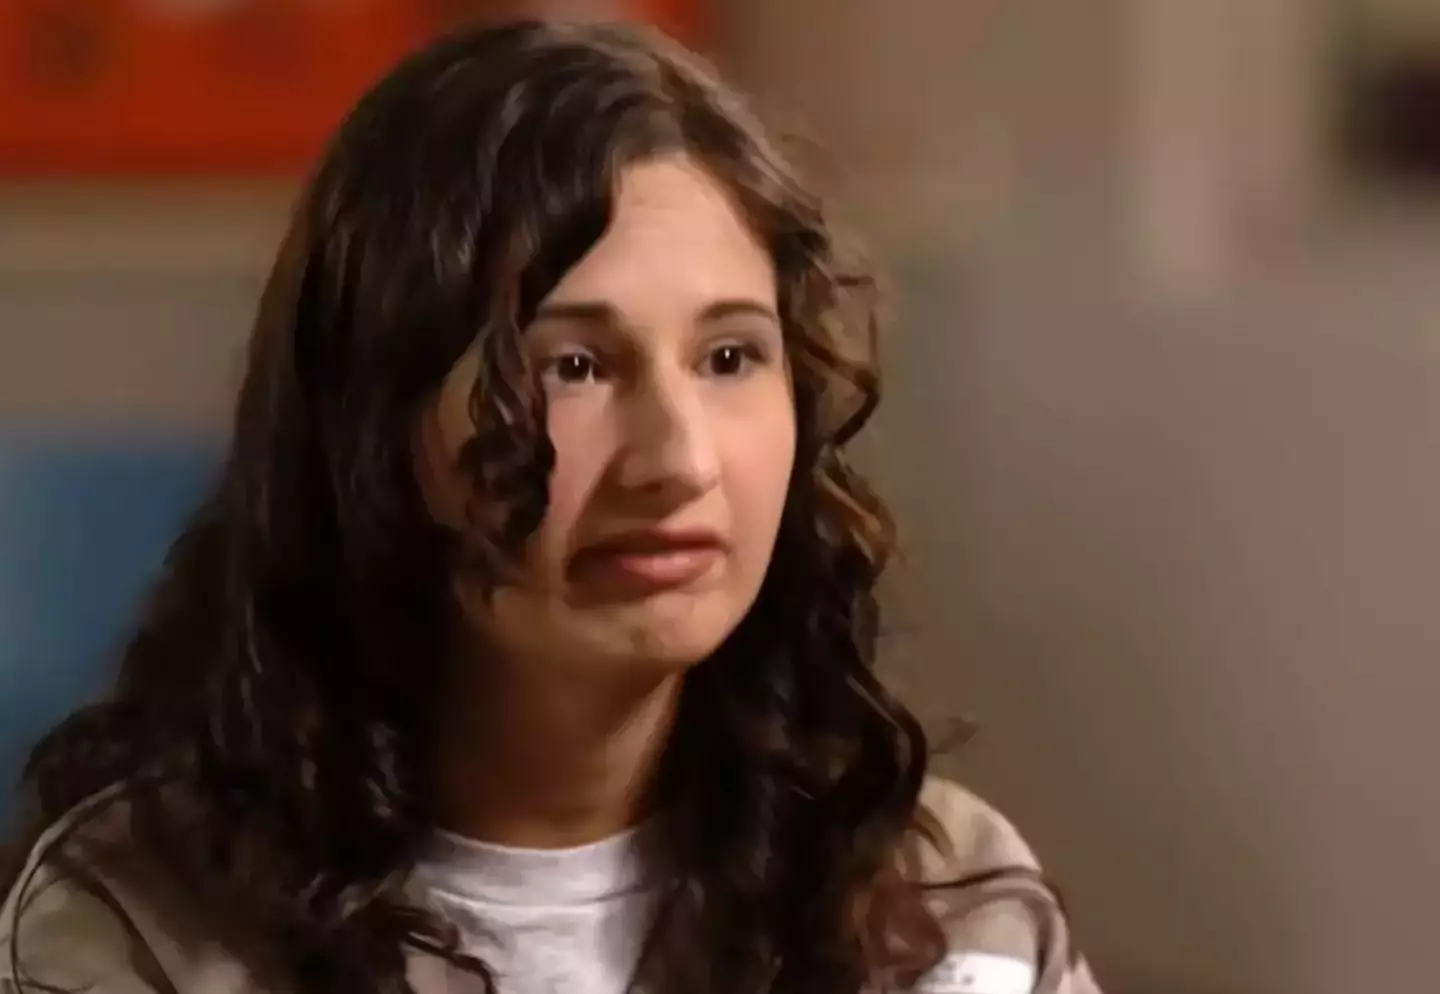 Gypsy Rose Blanchard was released from prison on Thursday.